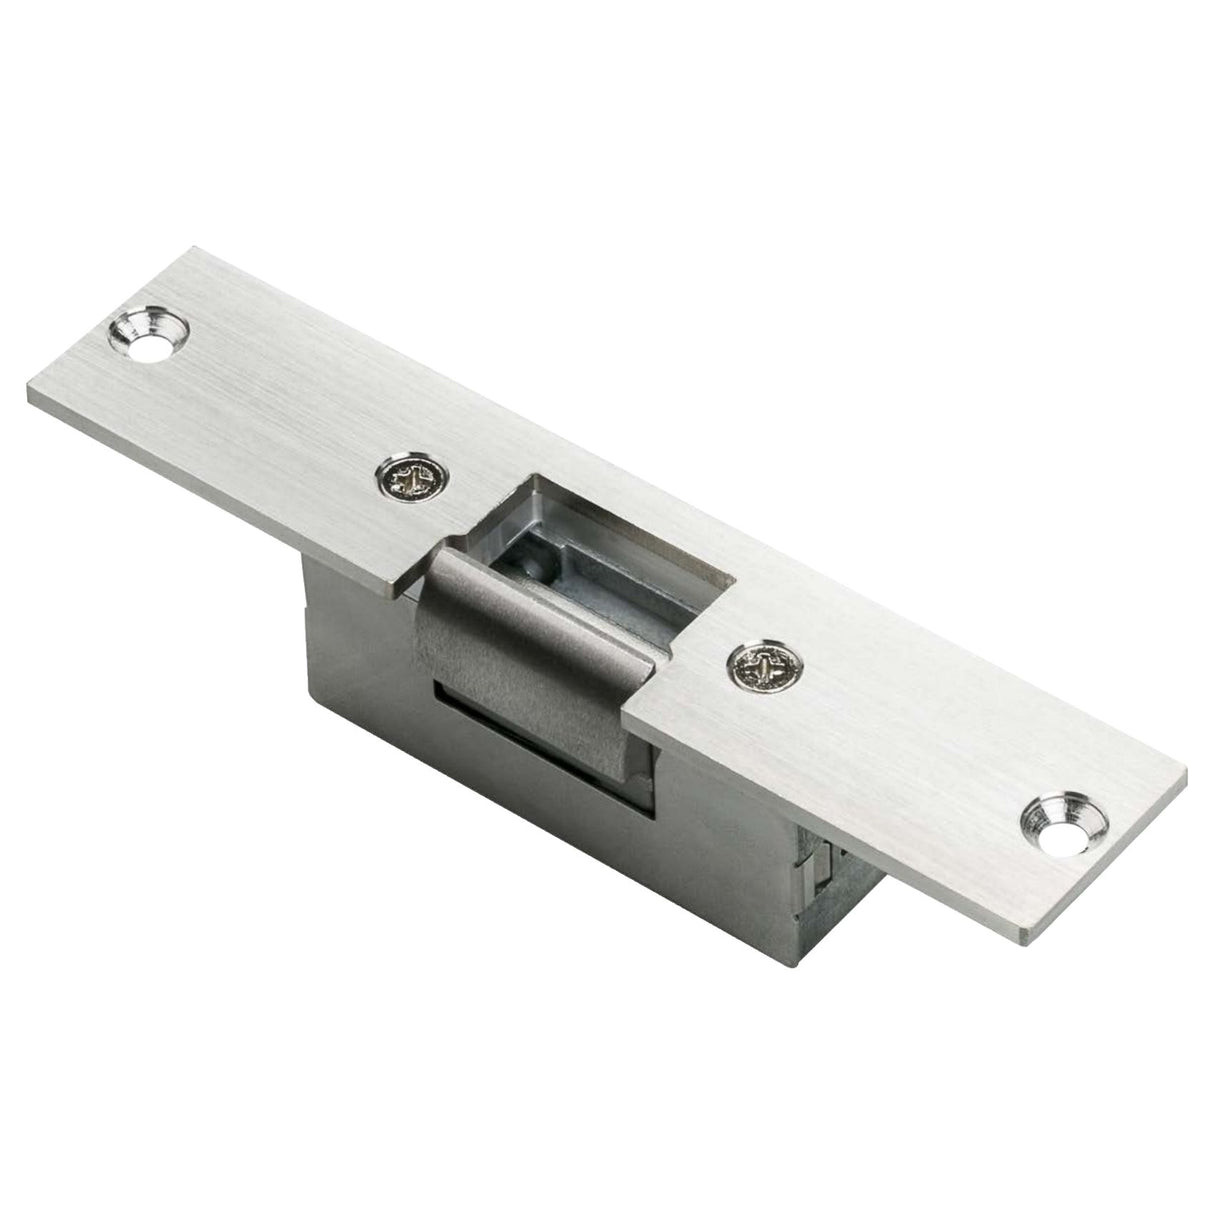 Seco-Larm SD-994A-A1SQ Reversible Electric Door Strike